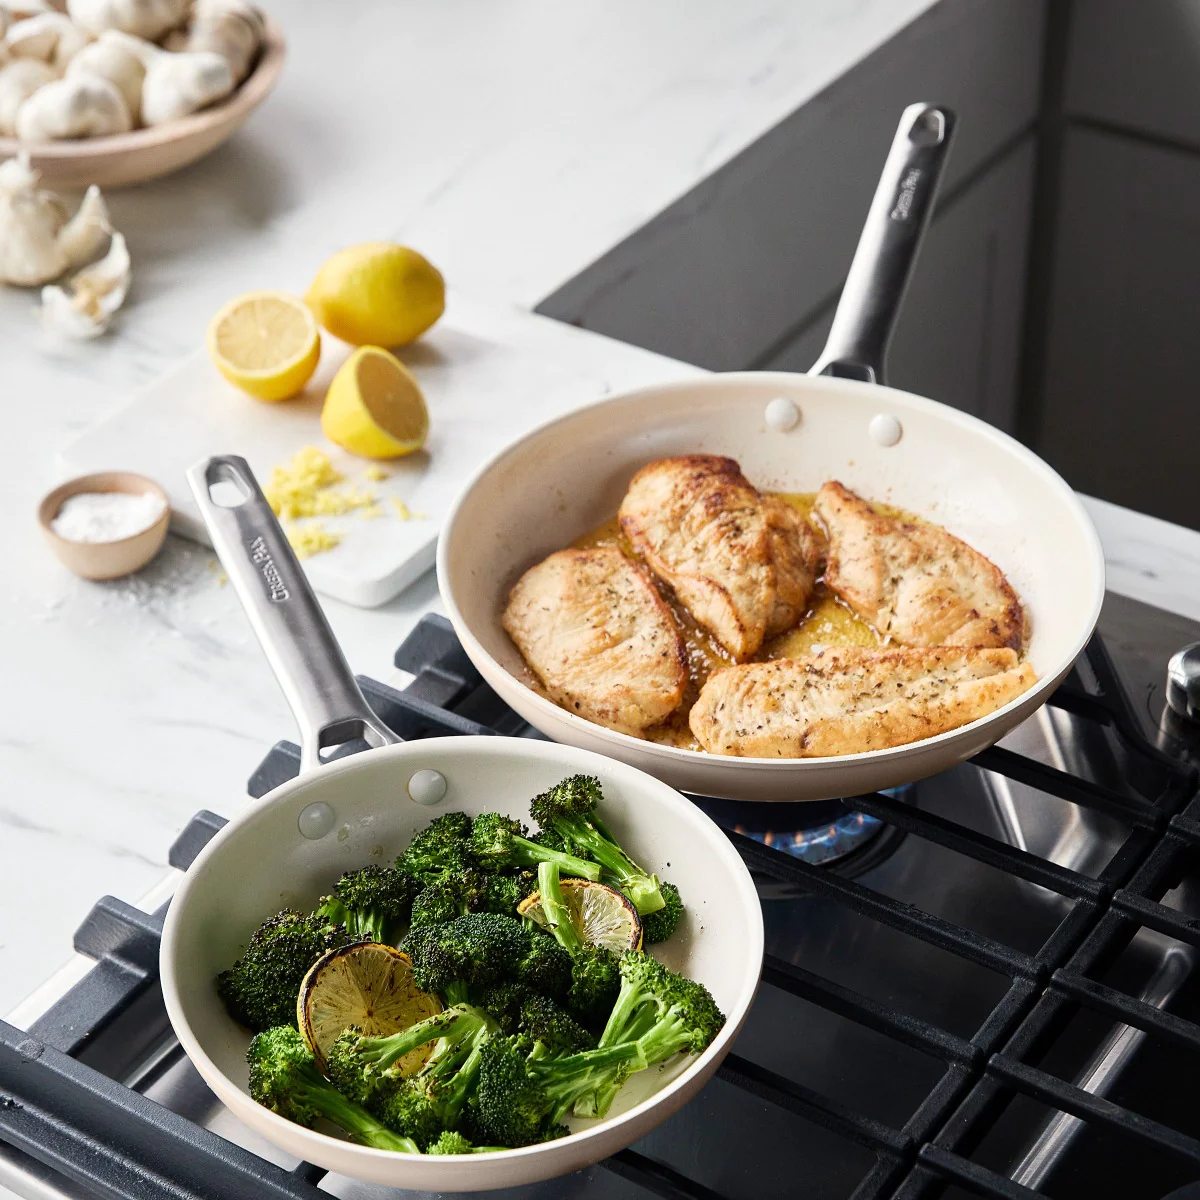 Greenpan Cookware: A Sustainable Choice for Modern Kitchens